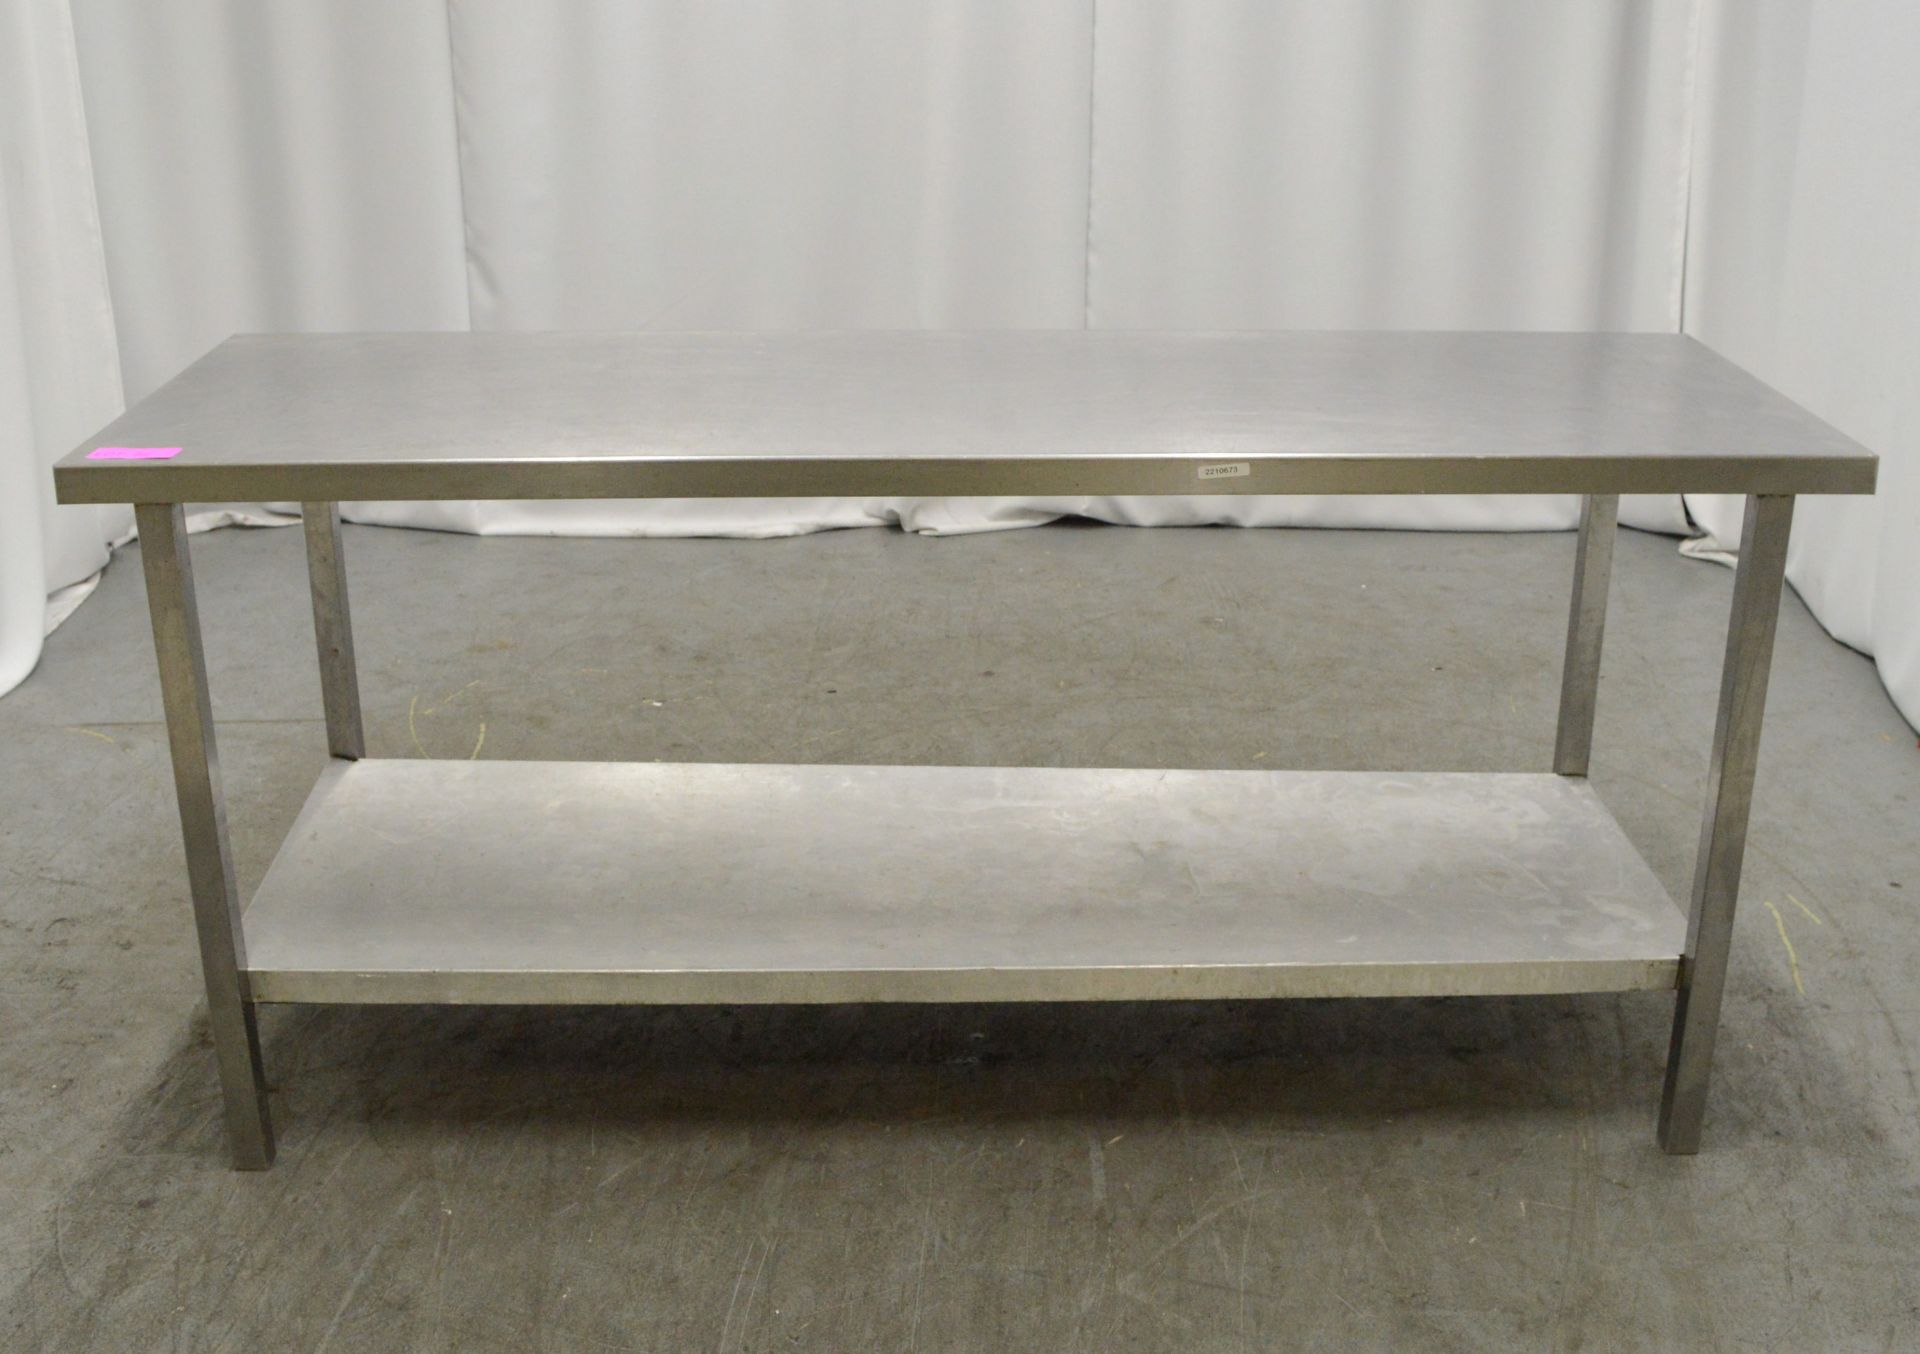 Preparation table 1830mm W x 610mm D x 830mm H